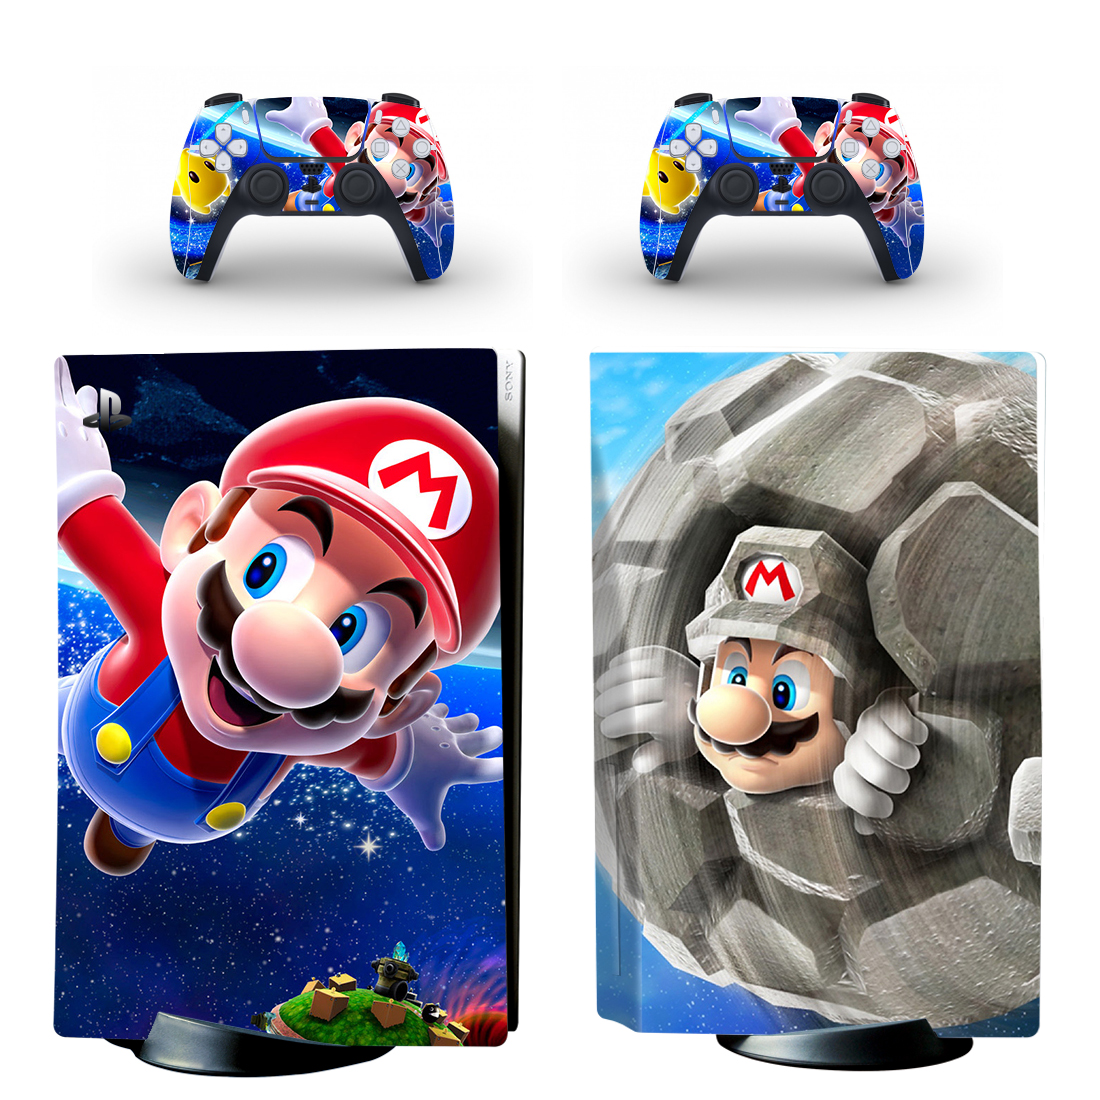 Super Mario Galaxy 2 PS5 Skin Sticker And Controllers